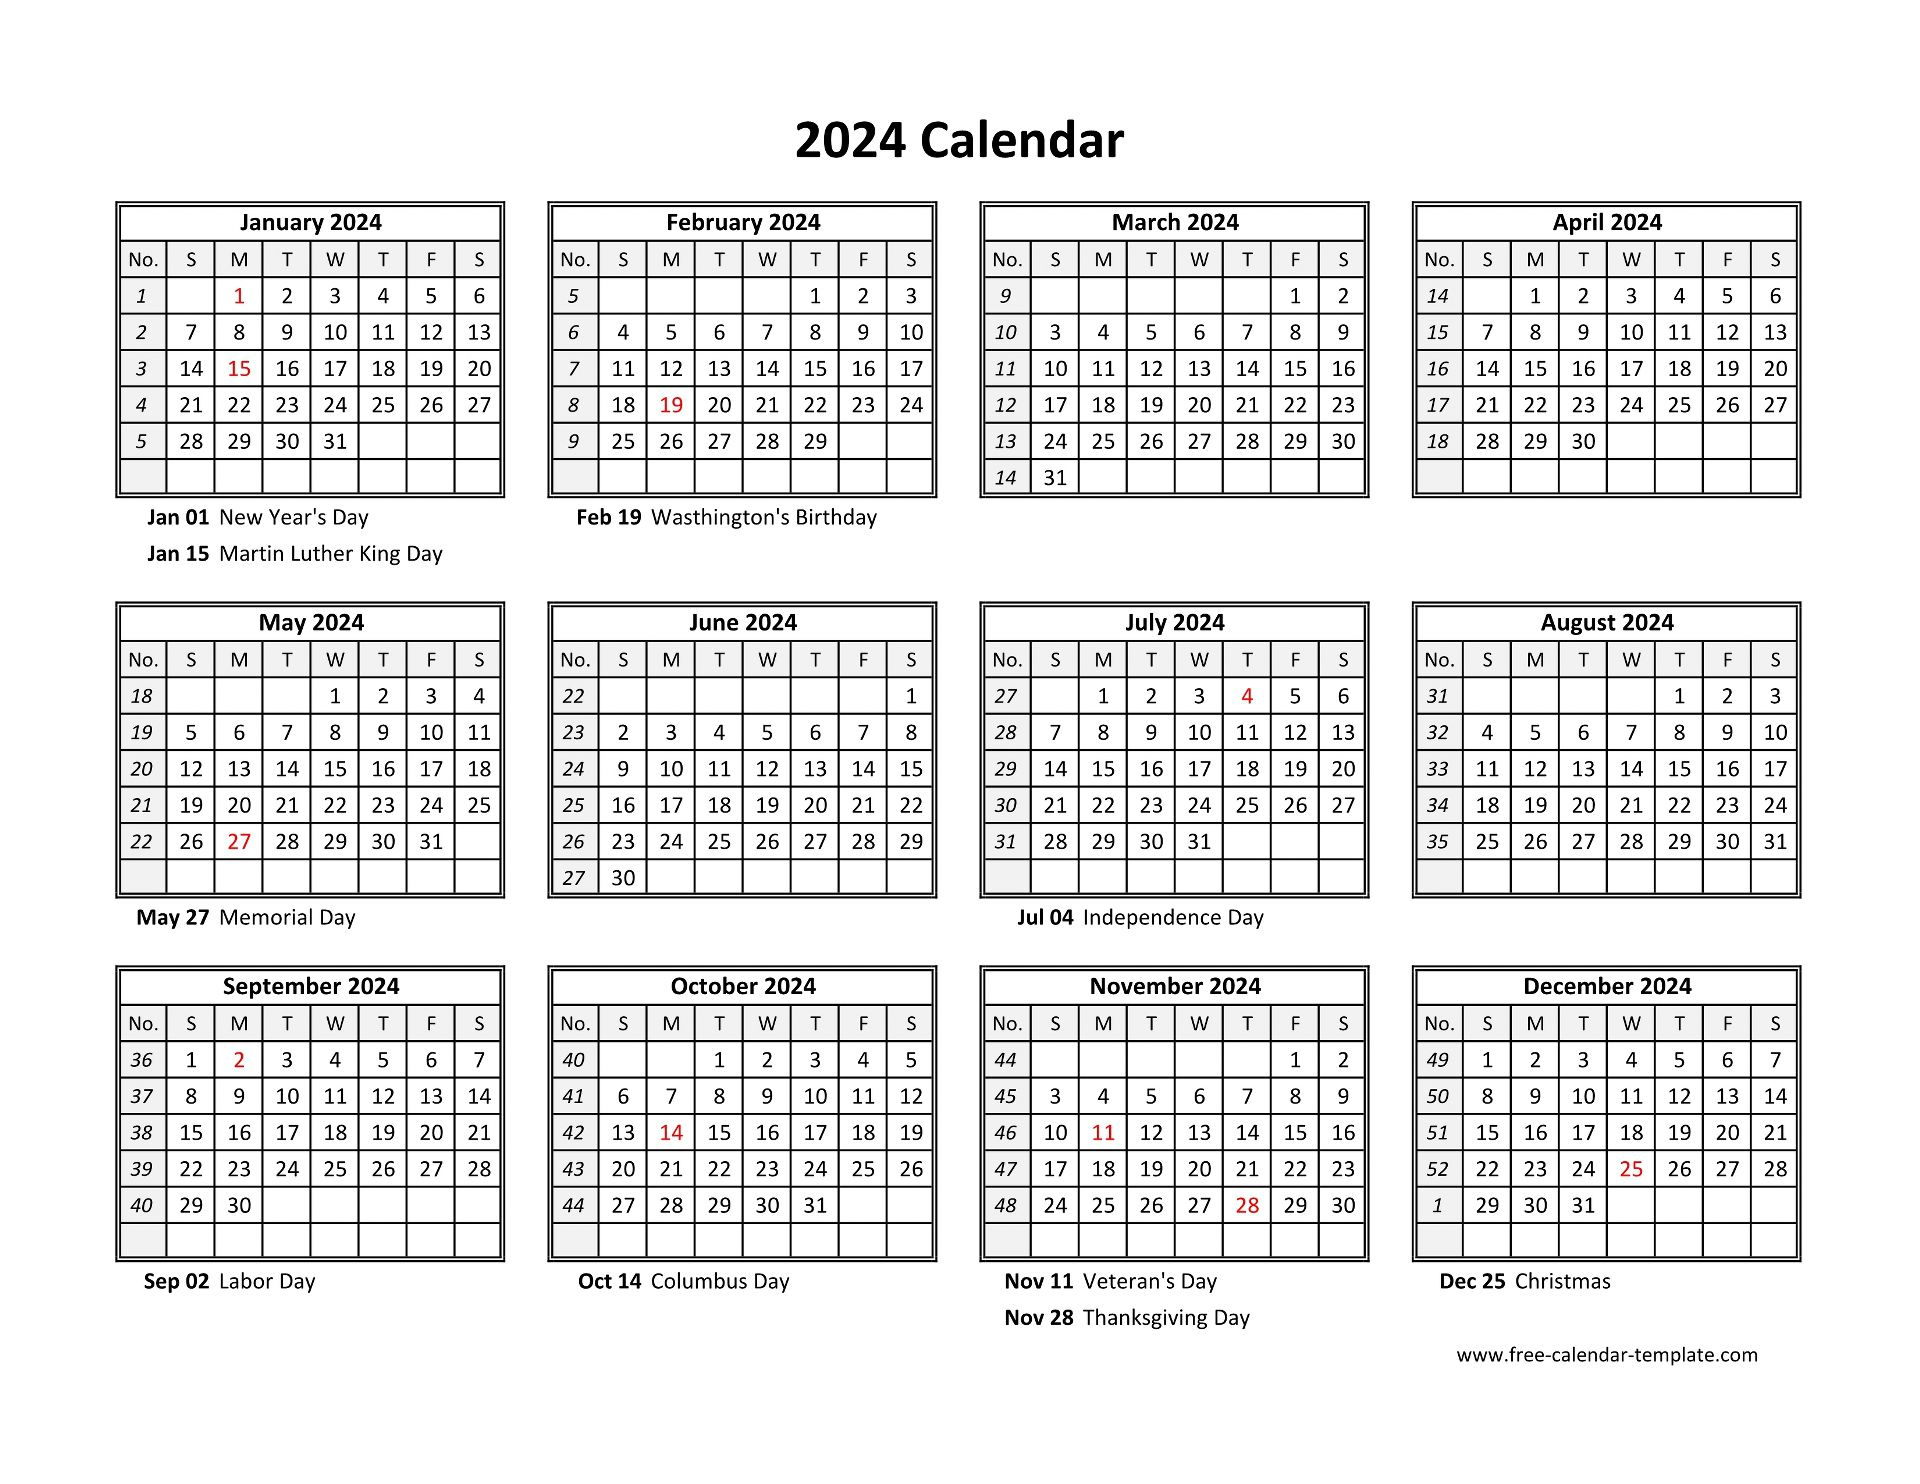 Yearly Calendar 2024 Printable With Federal Holidays | Free | Printable Calendar 2024 Yearly